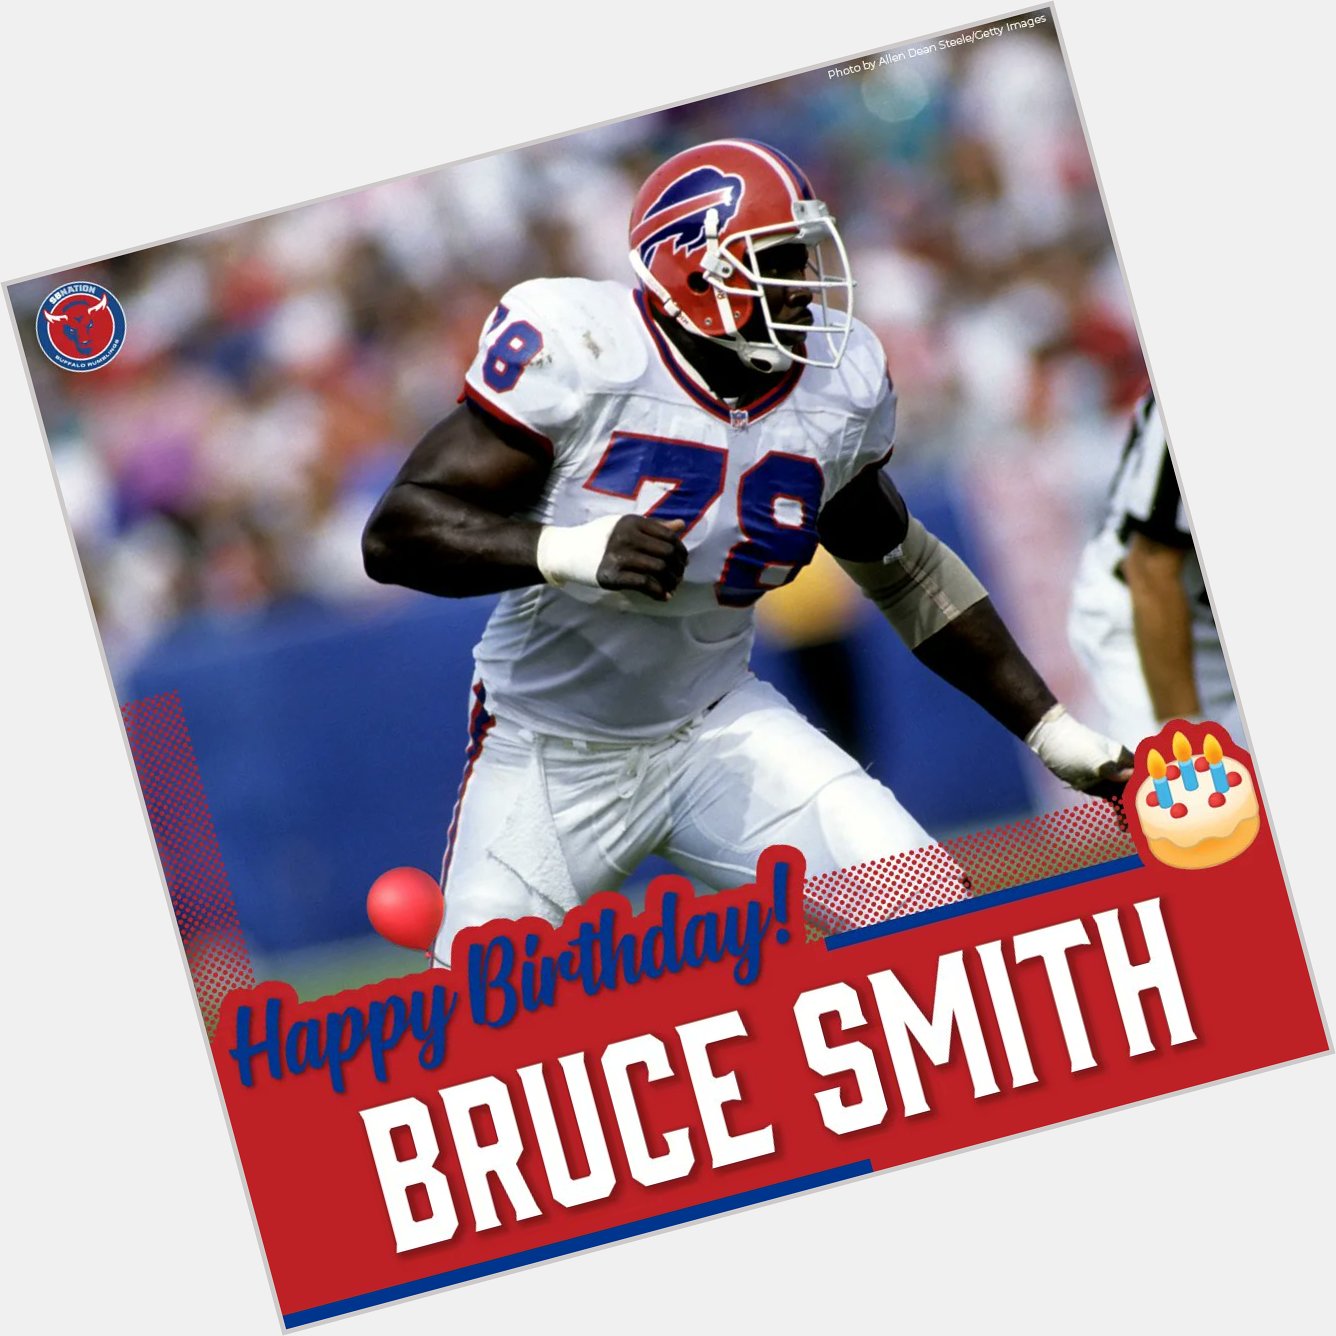 Happy birthday to Bills legend and NFL Hall of Fame member, Bruce Smith! 